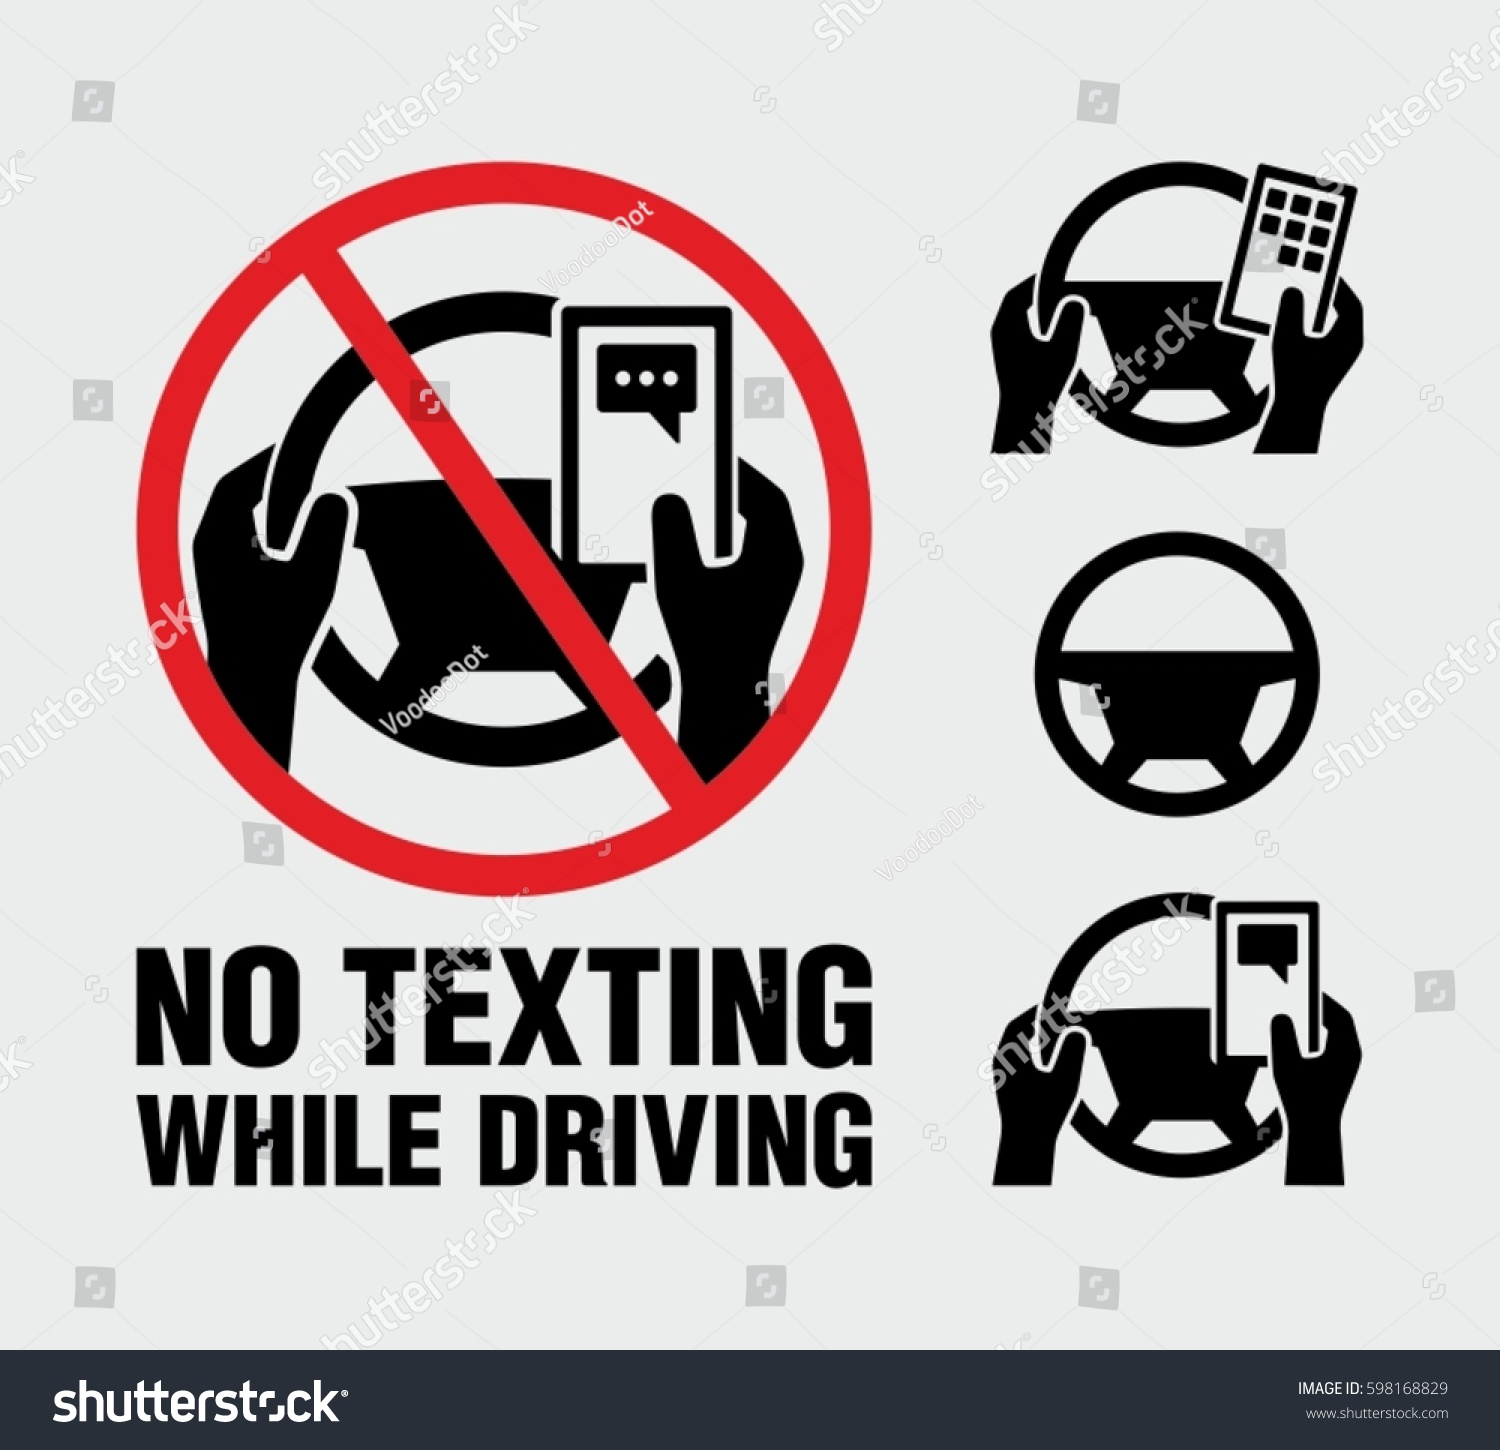 No texting, no cell phone use while driving vector sign 